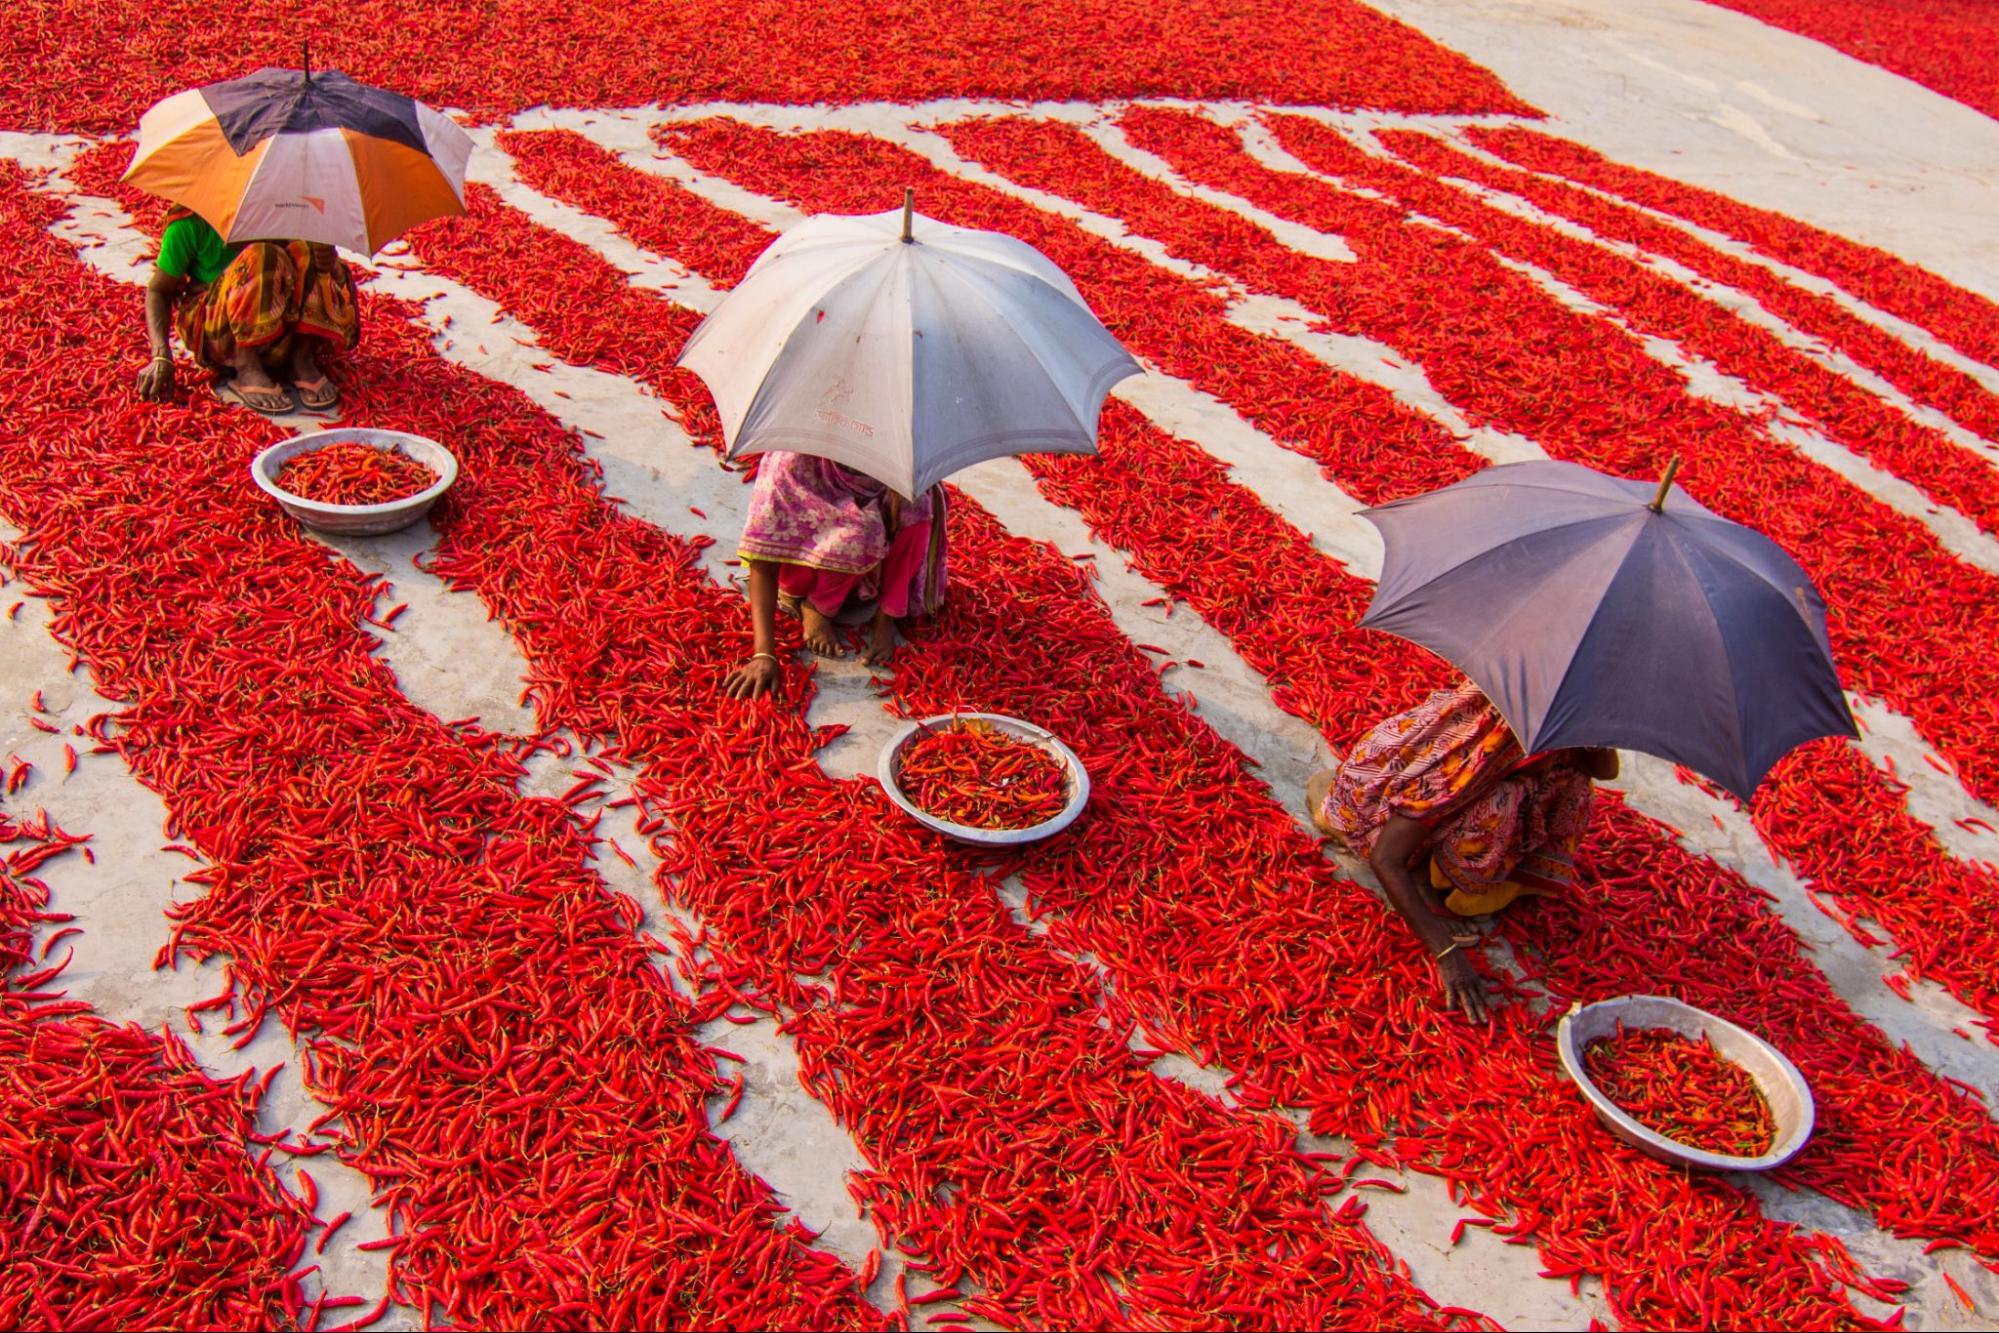 Chili being harvested in India - The Chili Report March 2023 - Red Crushed Chili Shortage  High Quality Organics